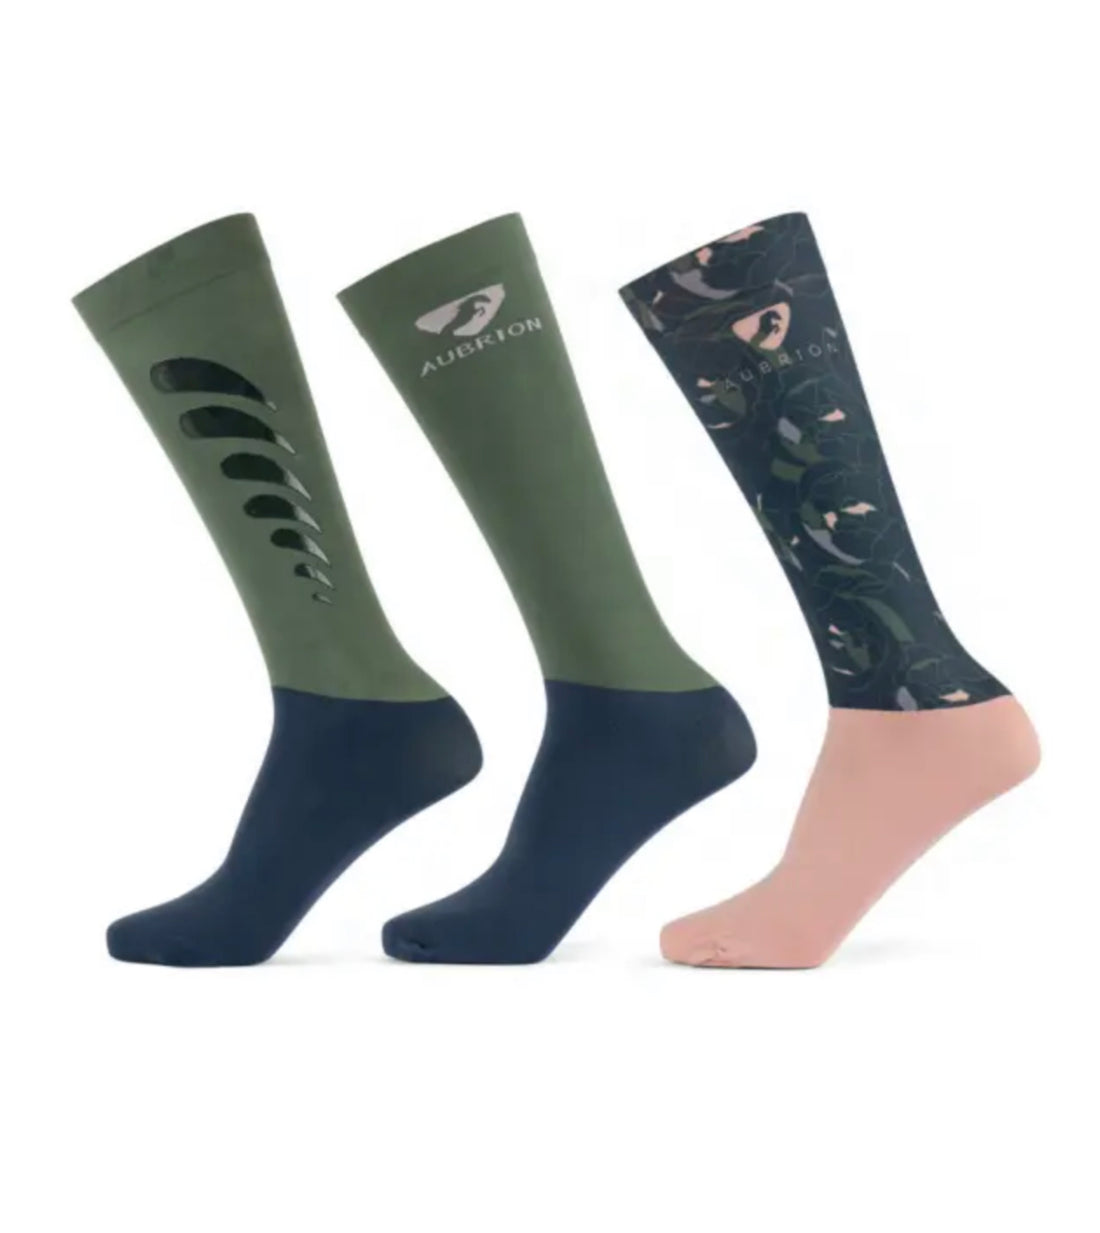 Shires Aubrion Silicone Performance Socks